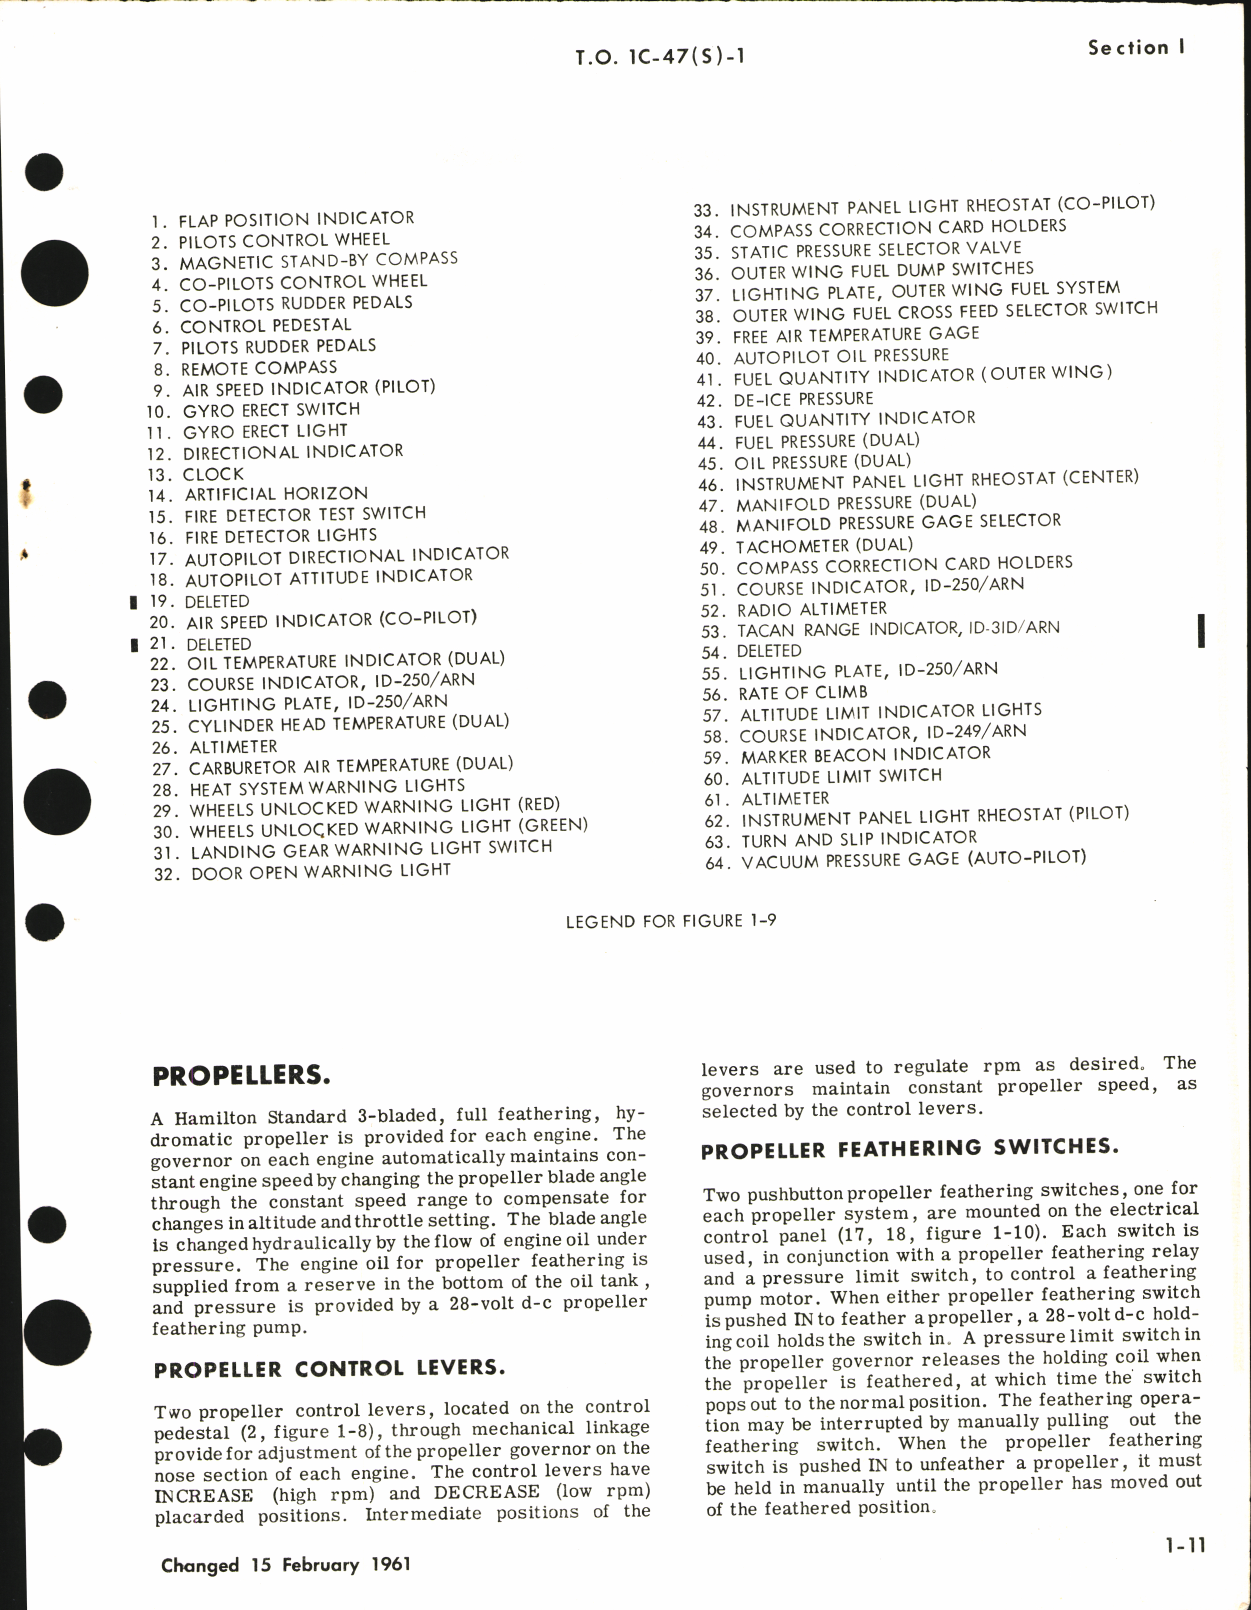 Sample page 7 from AirCorps Library document: Flight Manual for SC-47